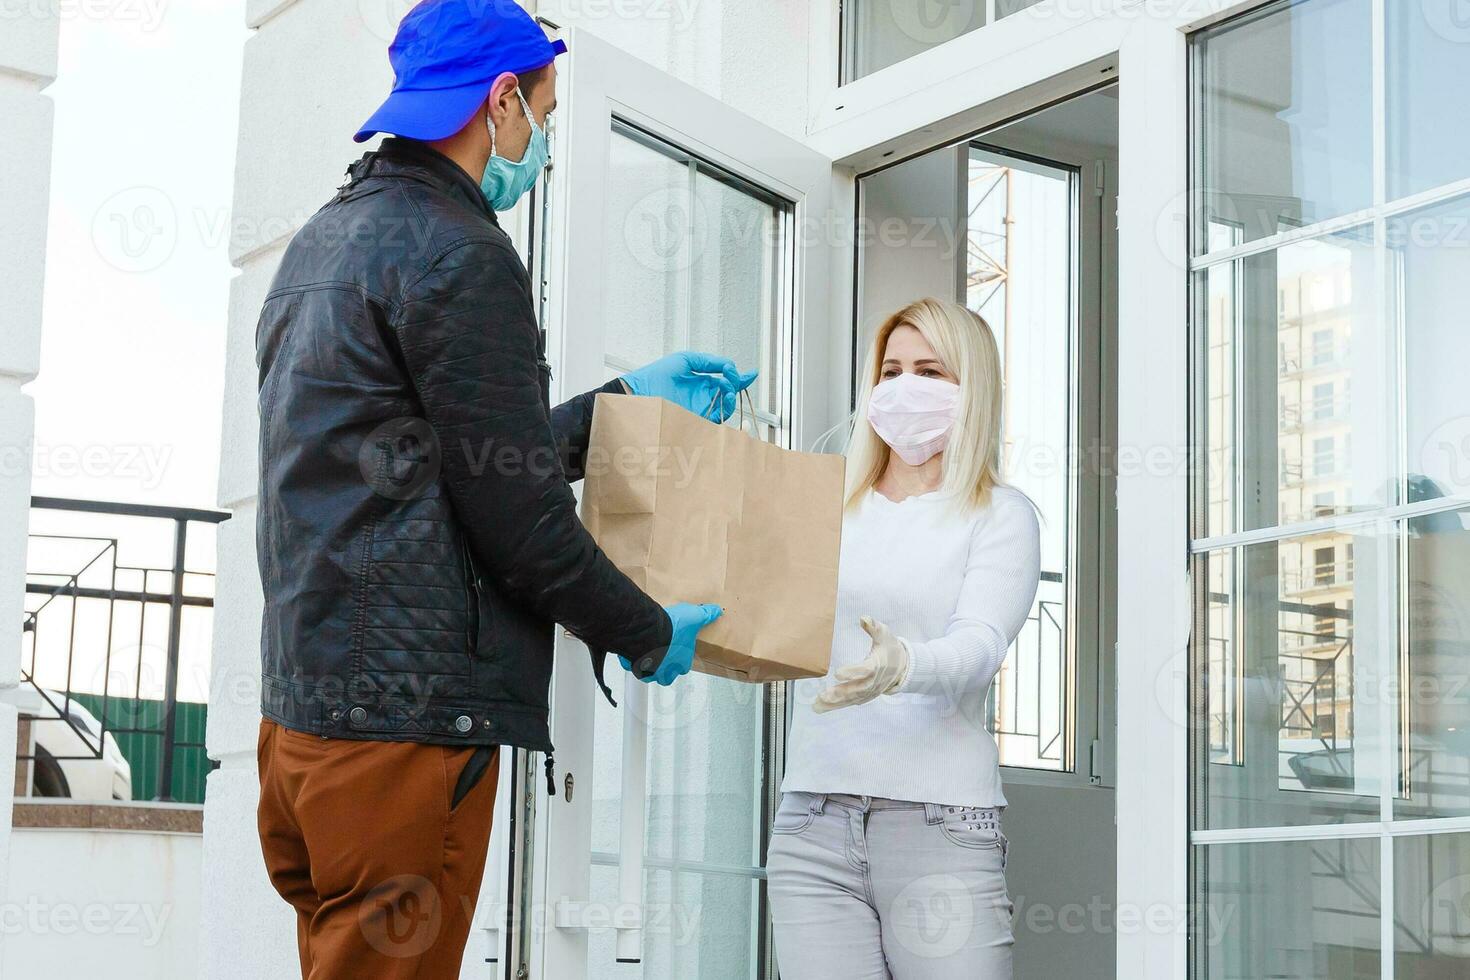 Courier, delivery man in protective mask and medical gloves delivers takeaway food. Delivery service under quarantine, disease outbreak, coronavirus covid-19 pandemic conditions. Stay home photo